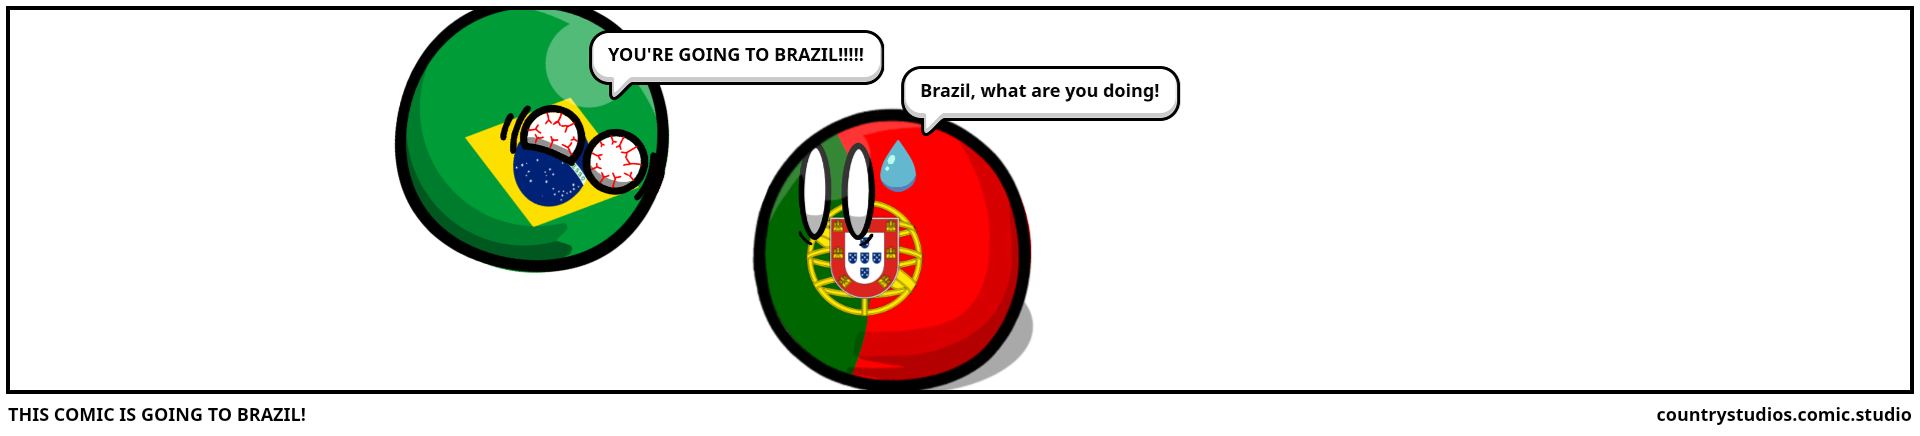 THIS COMIC IS GOING TO BRAZIL!